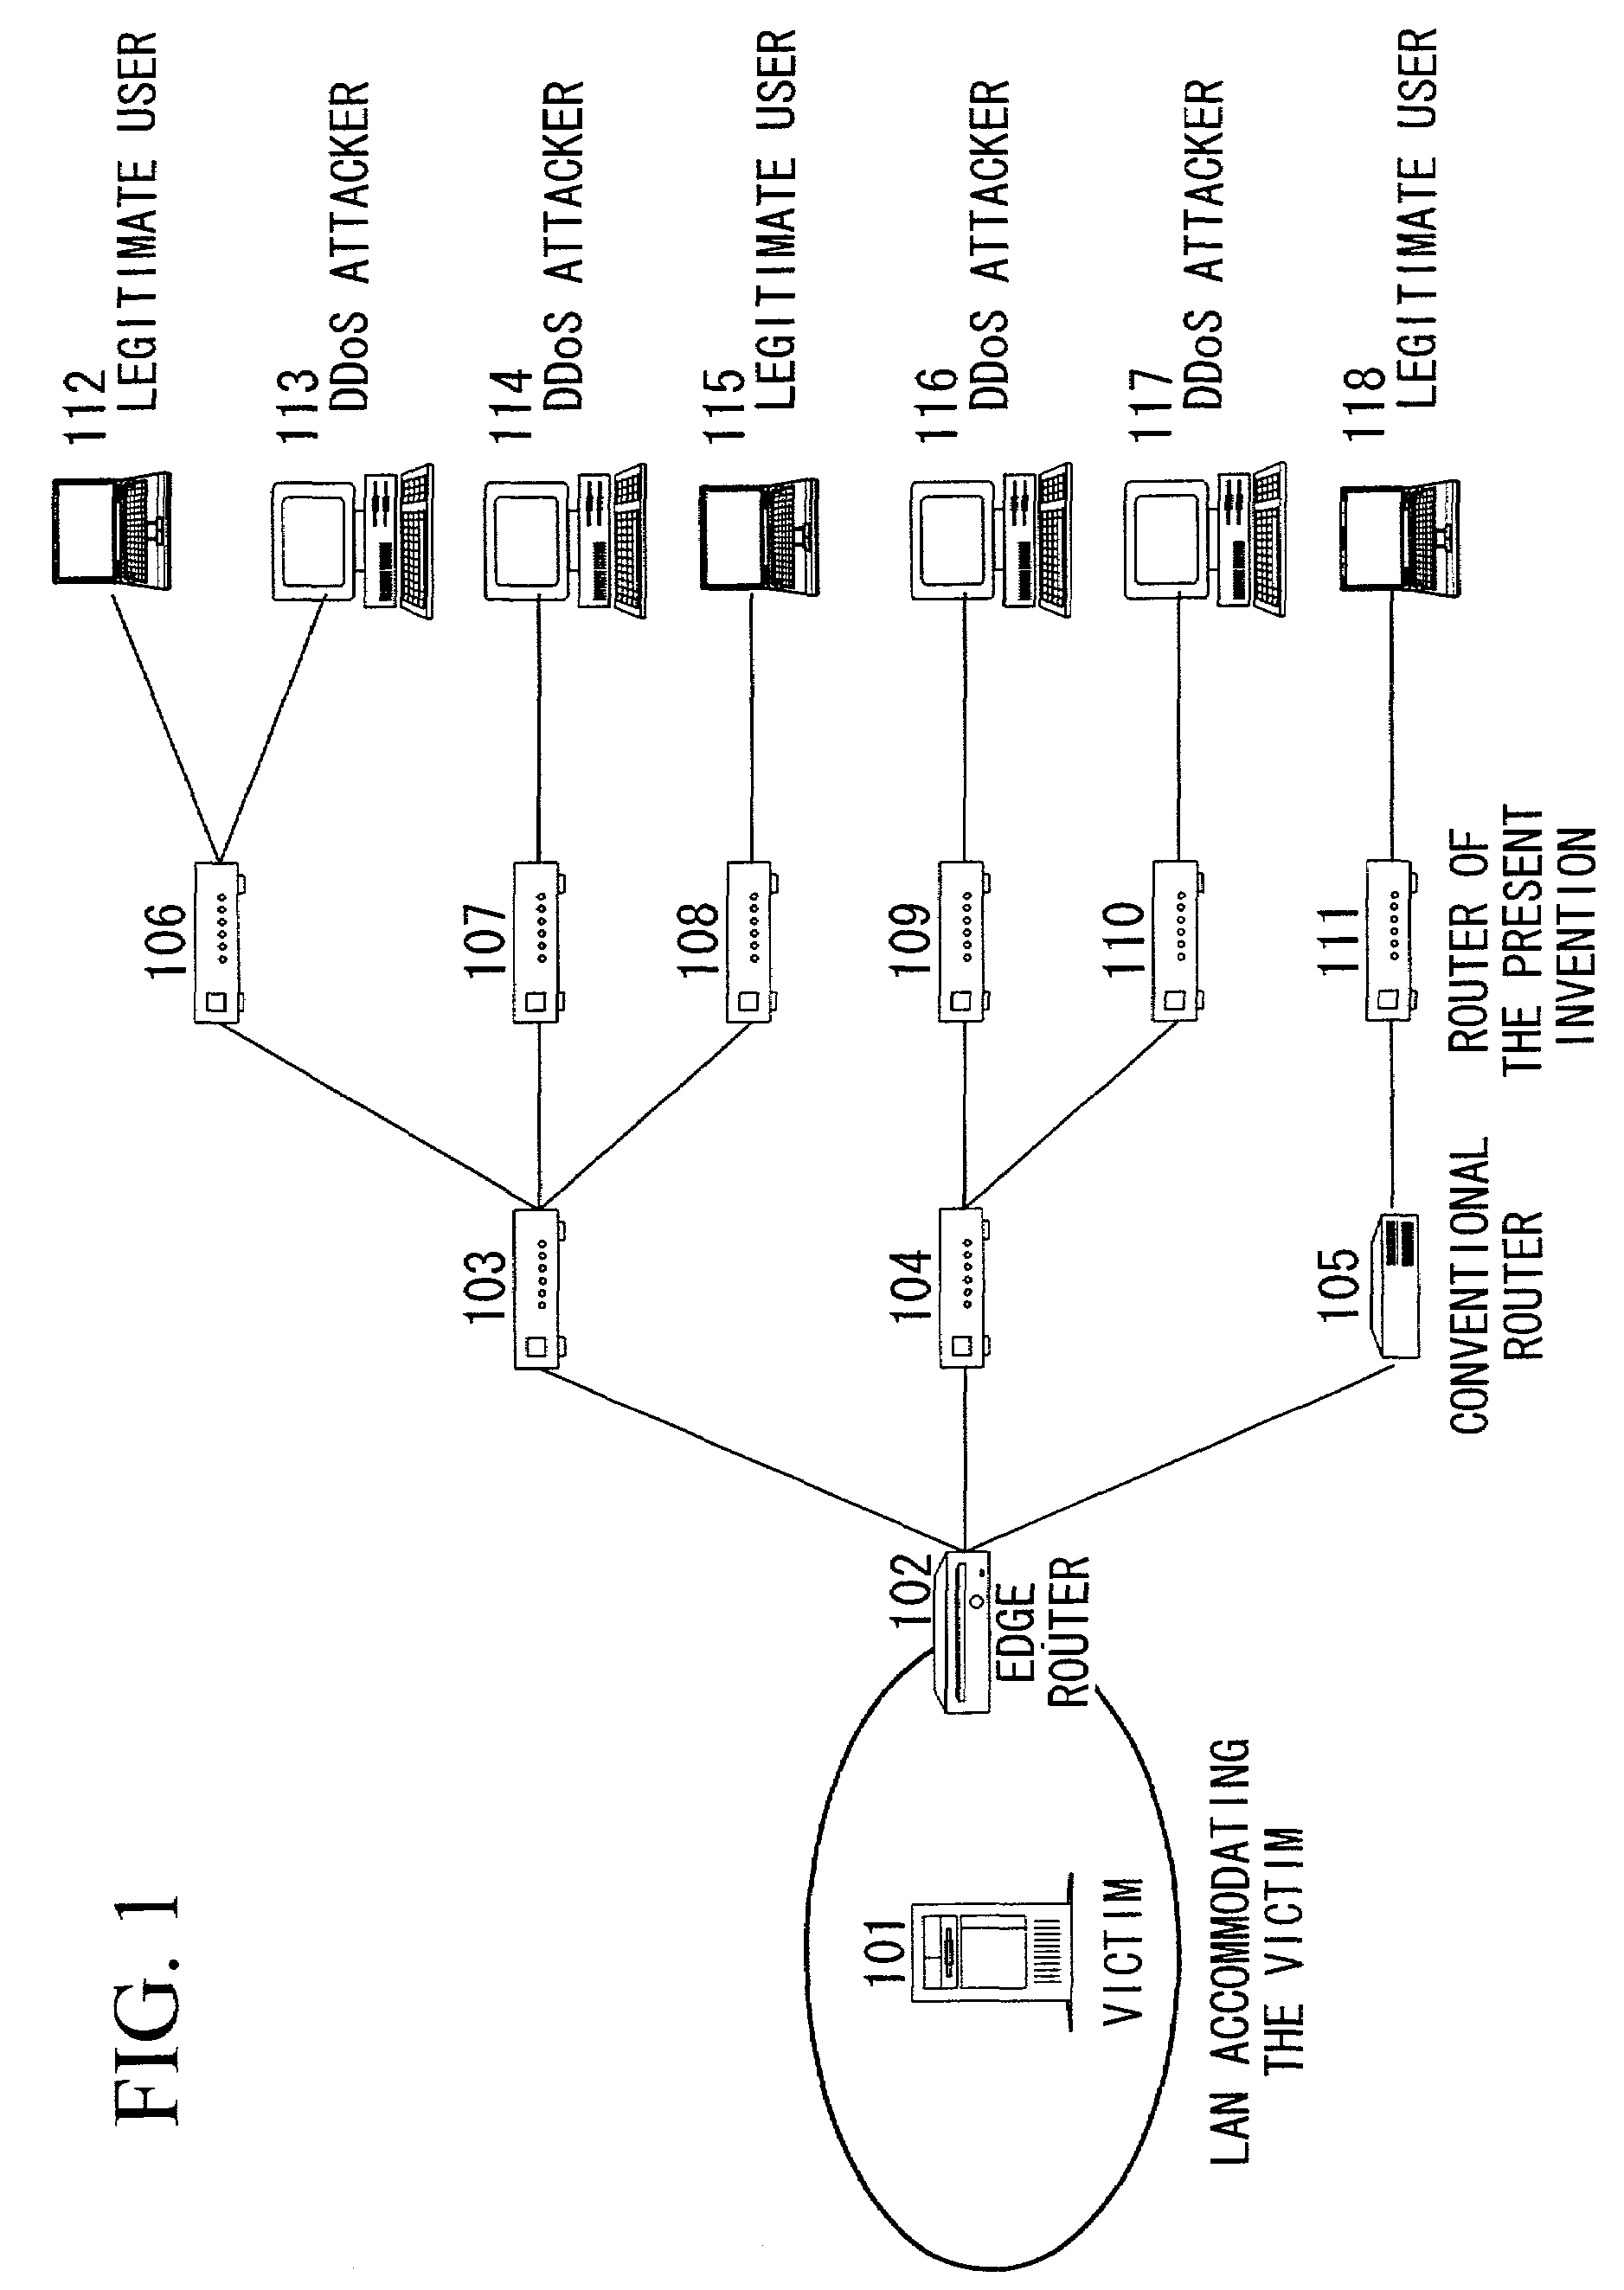 Distributed denial of service attack defense method and device